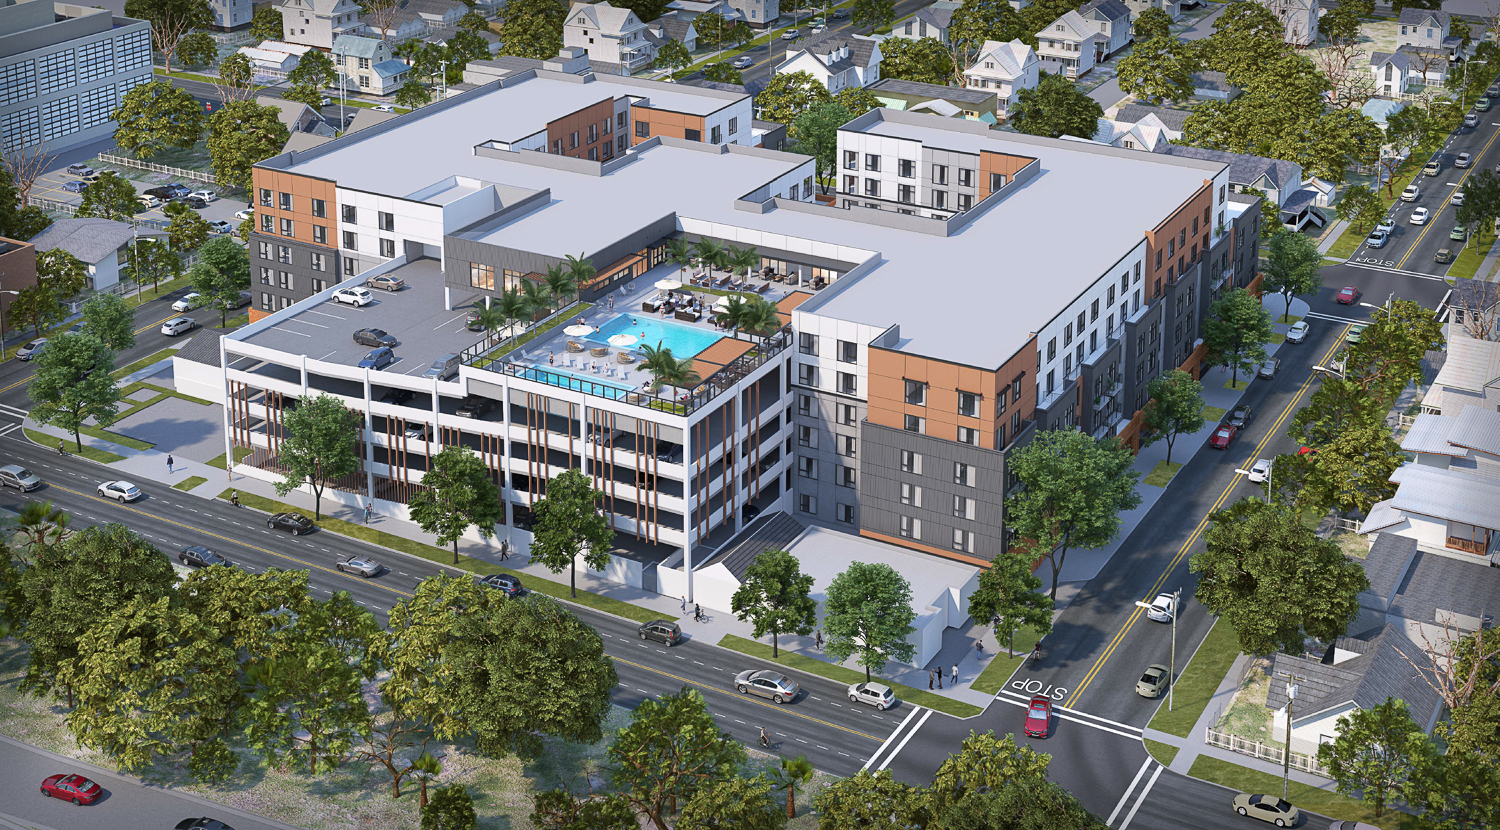 324 Alhambra Boulevard aerial view with the on-site garage visible, rendering by HRGA